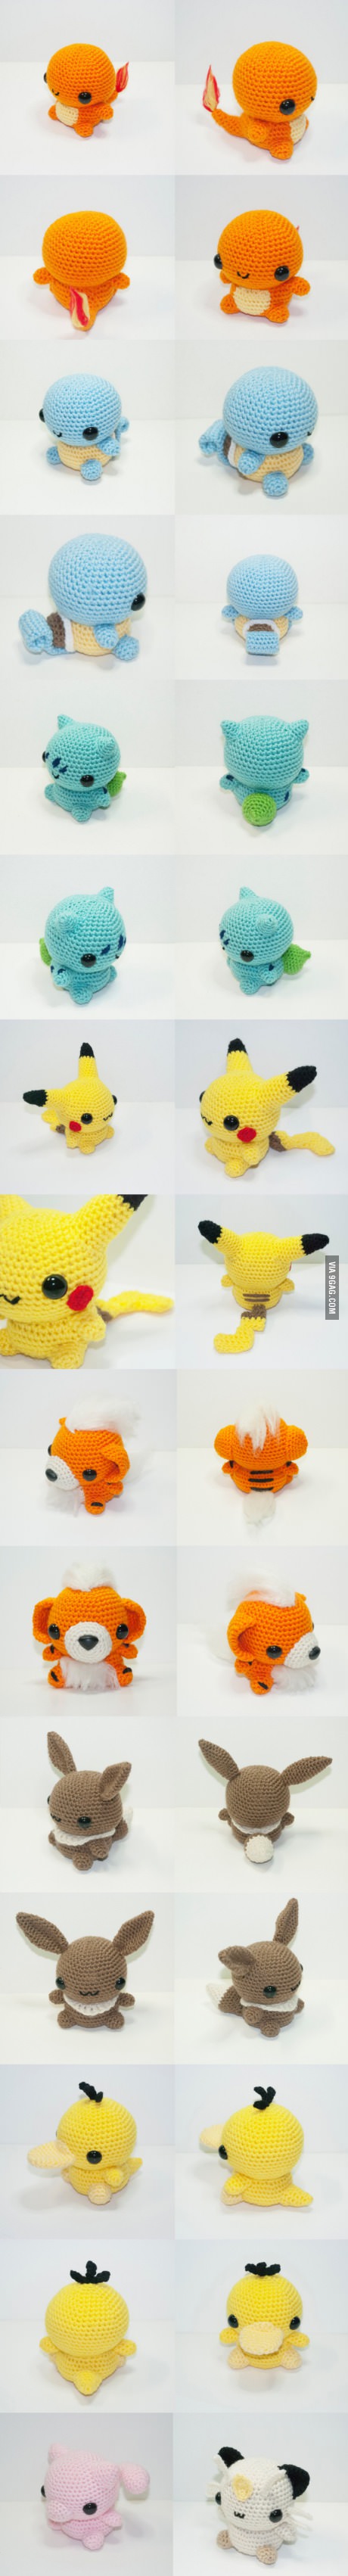 Some knitted Pokémons